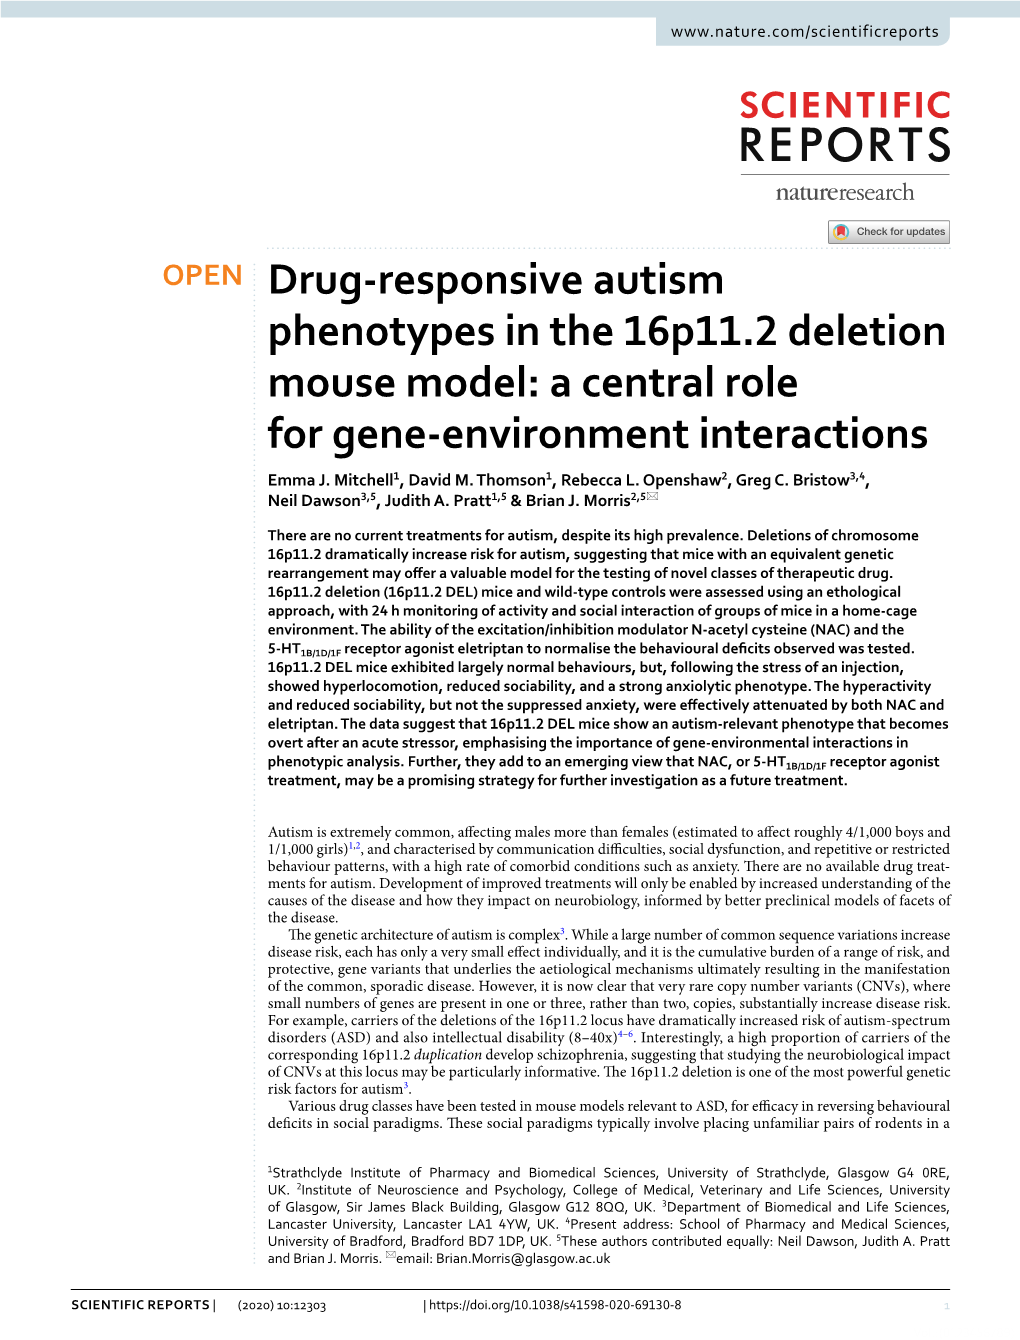 Drug-Responsive Autism Phenotypes in the 16P11.2 Deletion Mouse Model